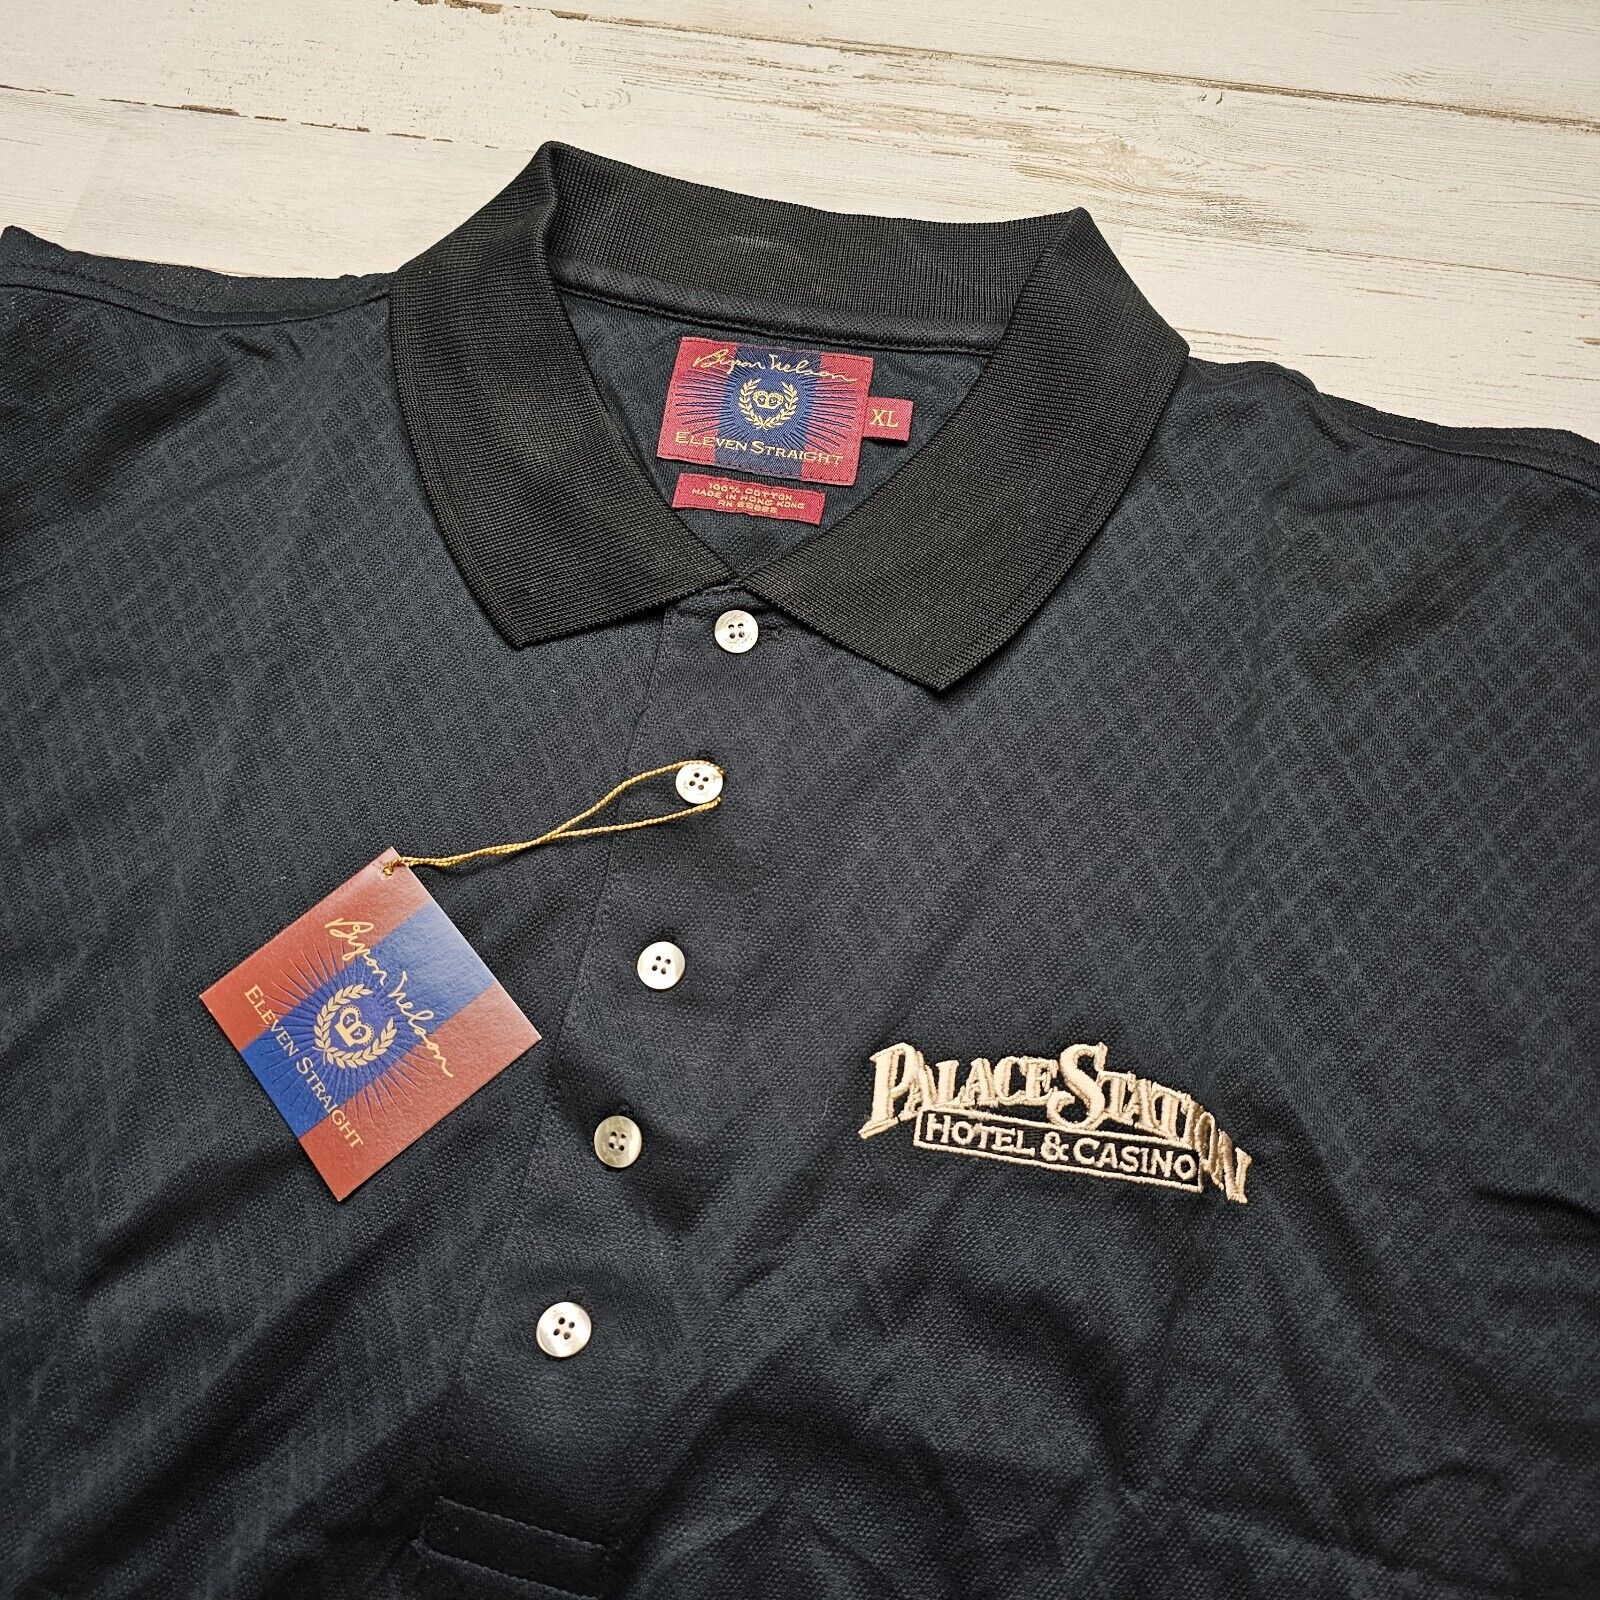 VTG NEW PALACE STATION Hotel & Casino Las Vegas Embroidered Polo Golf Shirt XL